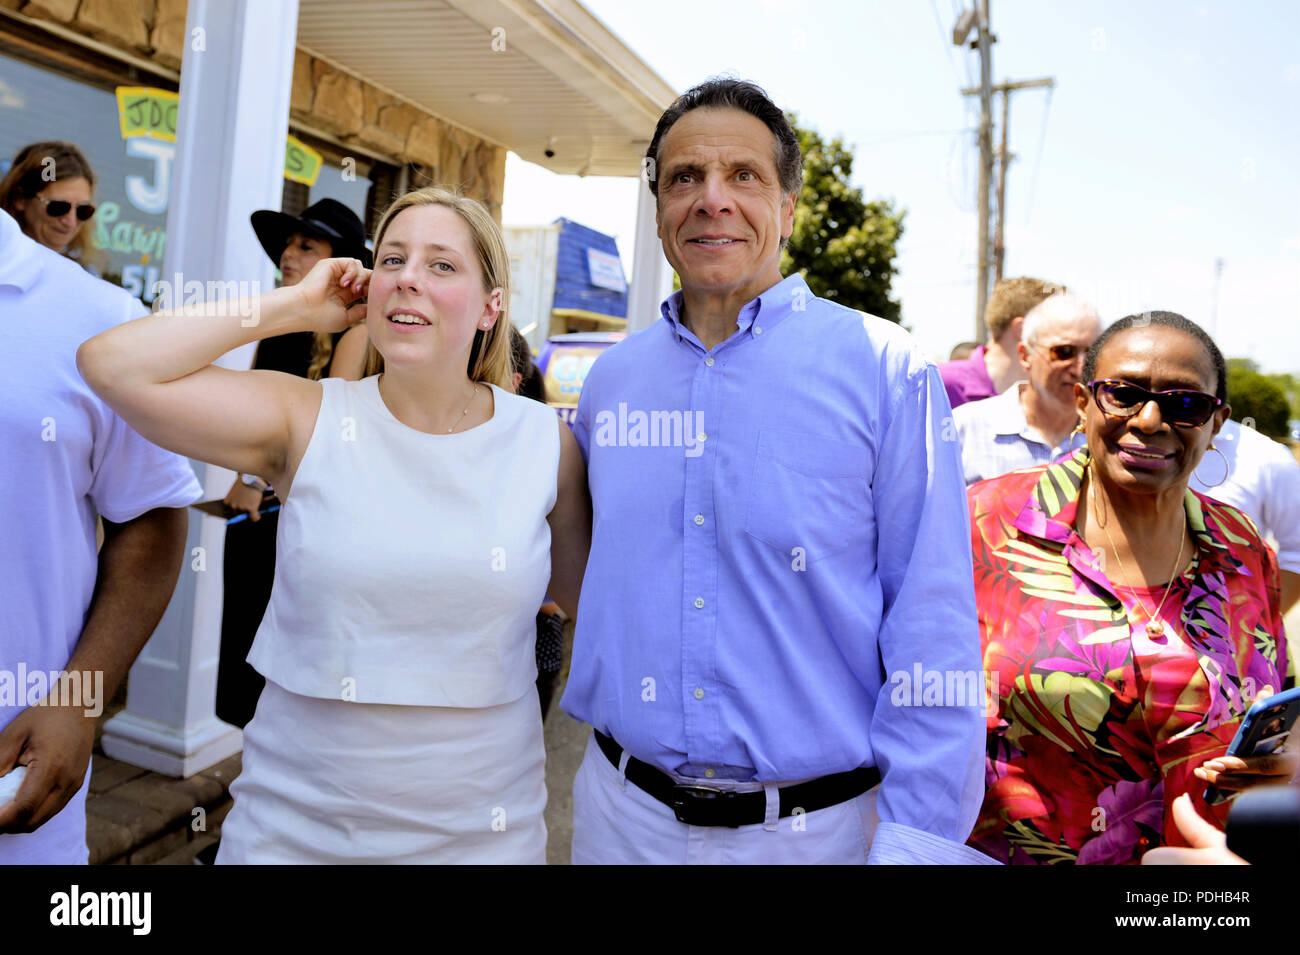 Massapequa, New York, USA. 5th Aug, 2018. L-R, LIUBA GRECHEN SHIRLEY, Congressional candidate for NY 2nd District, and Governor ANDREW CUOMO, running for re-election, walk together with supporters during joint campaign office opening for Grechen Shirley and NY Sen. J. Brooks, aiming for a Democratic Blue Wave in November midterm elections. Credit: Ann Parry/ZUMA Wire/Alamy Live News Stock Photo